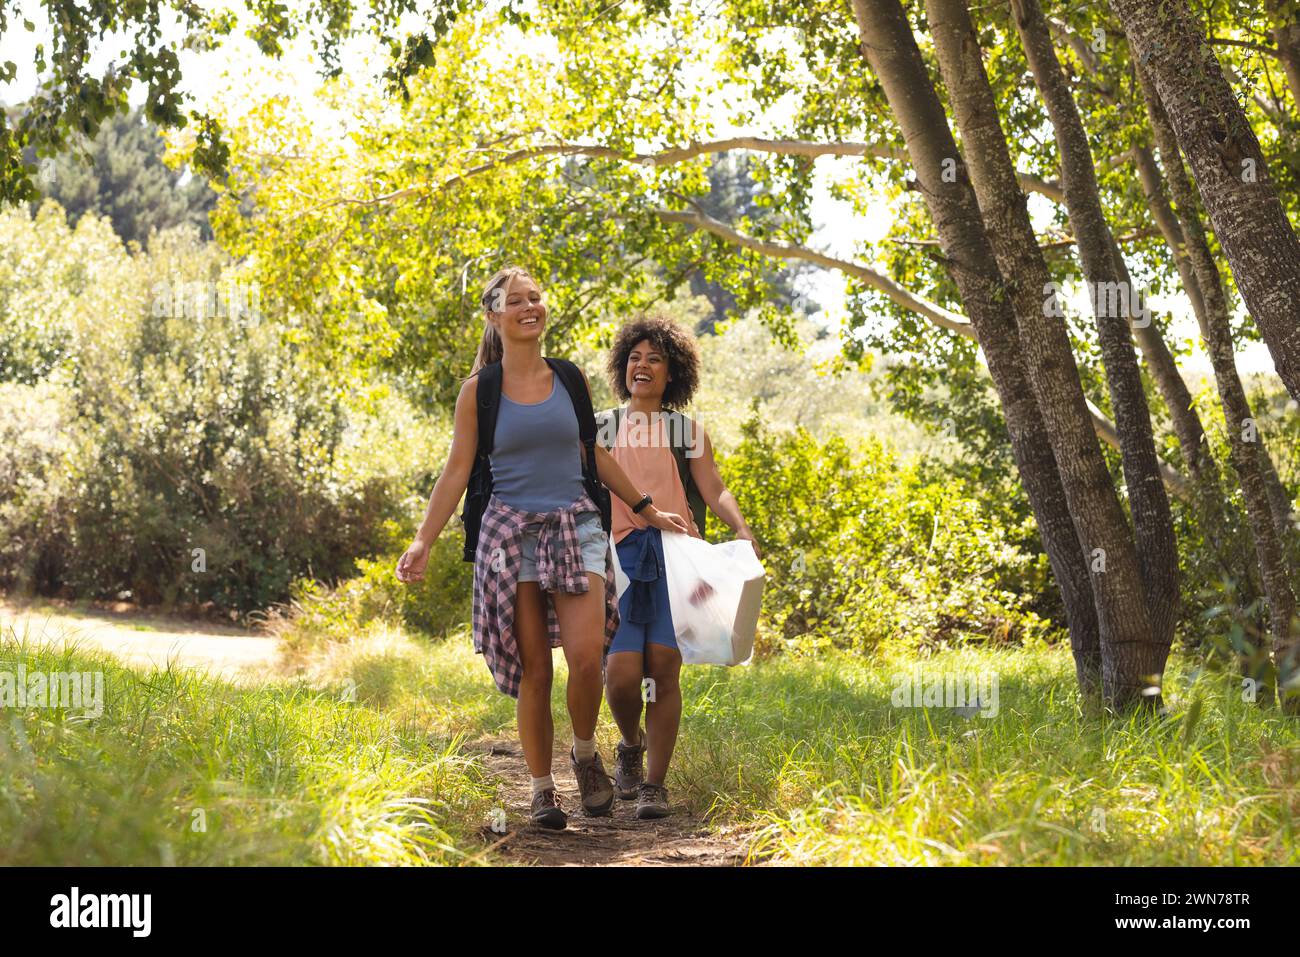 Two women collect trash on a sunny hike, sharing joy. Stock Photo